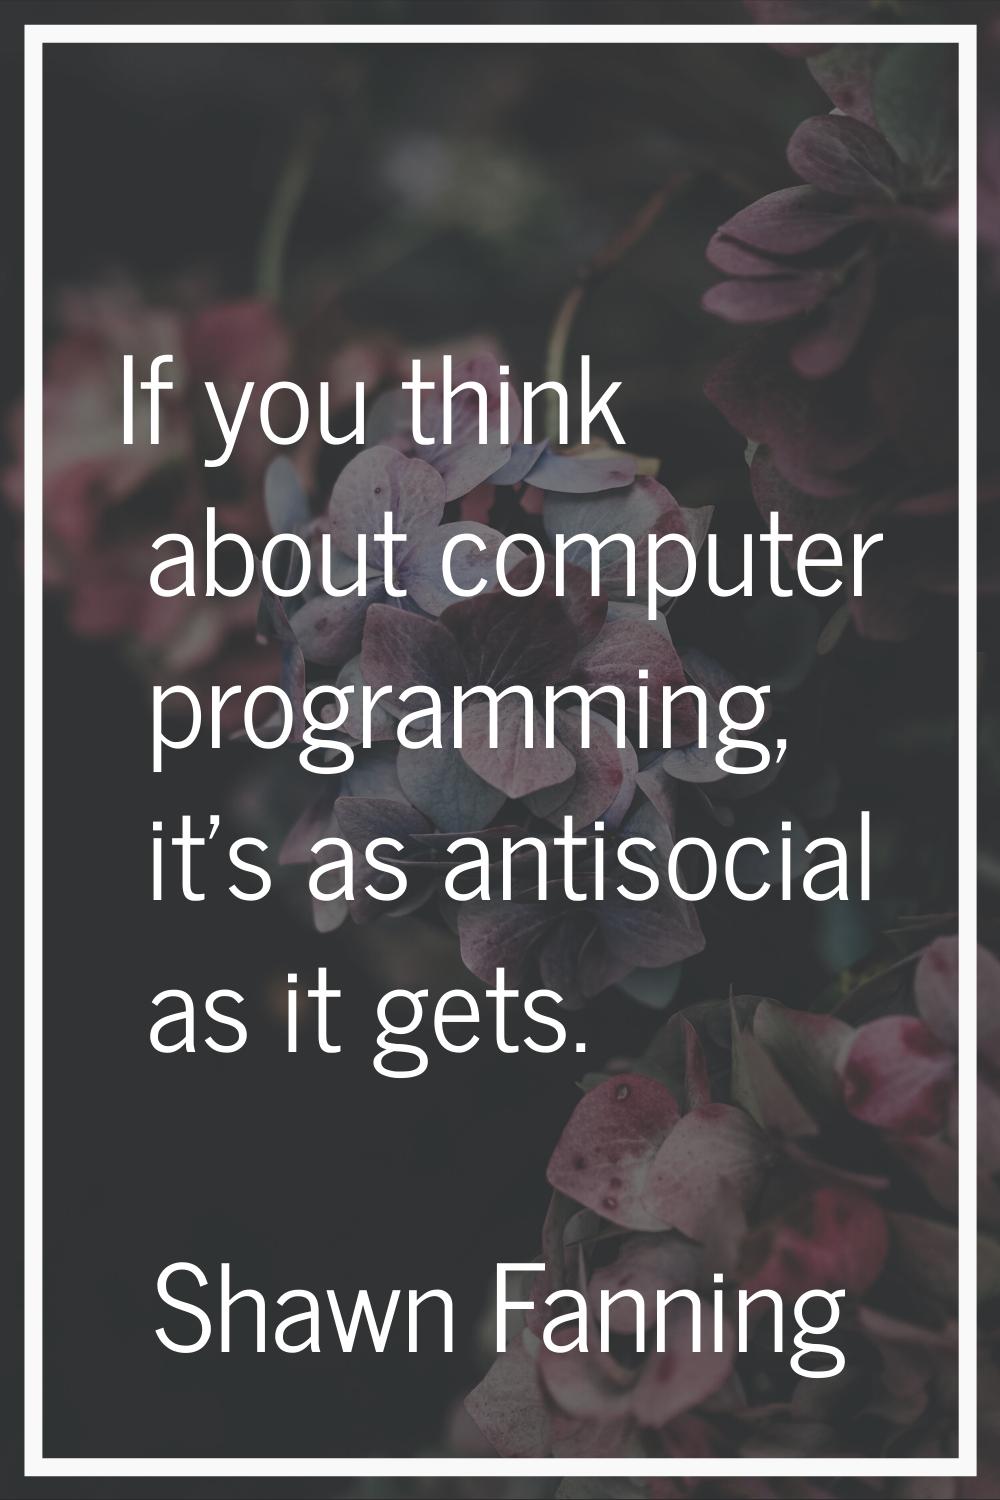 If you think about computer programming, it's as antisocial as it gets.